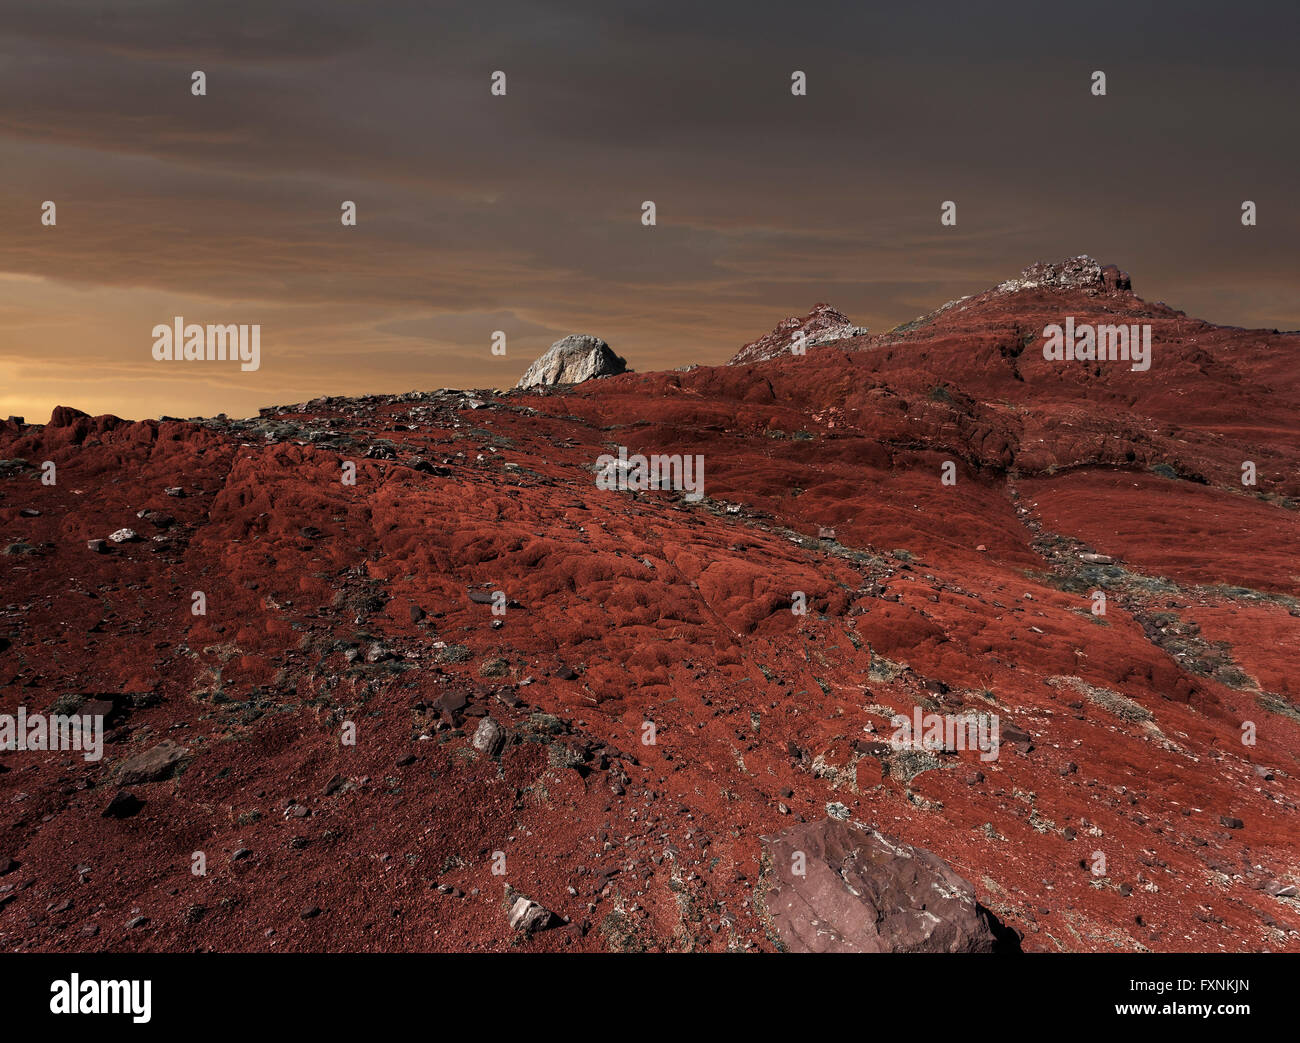 MARS THE RED PLANET Stock Photo